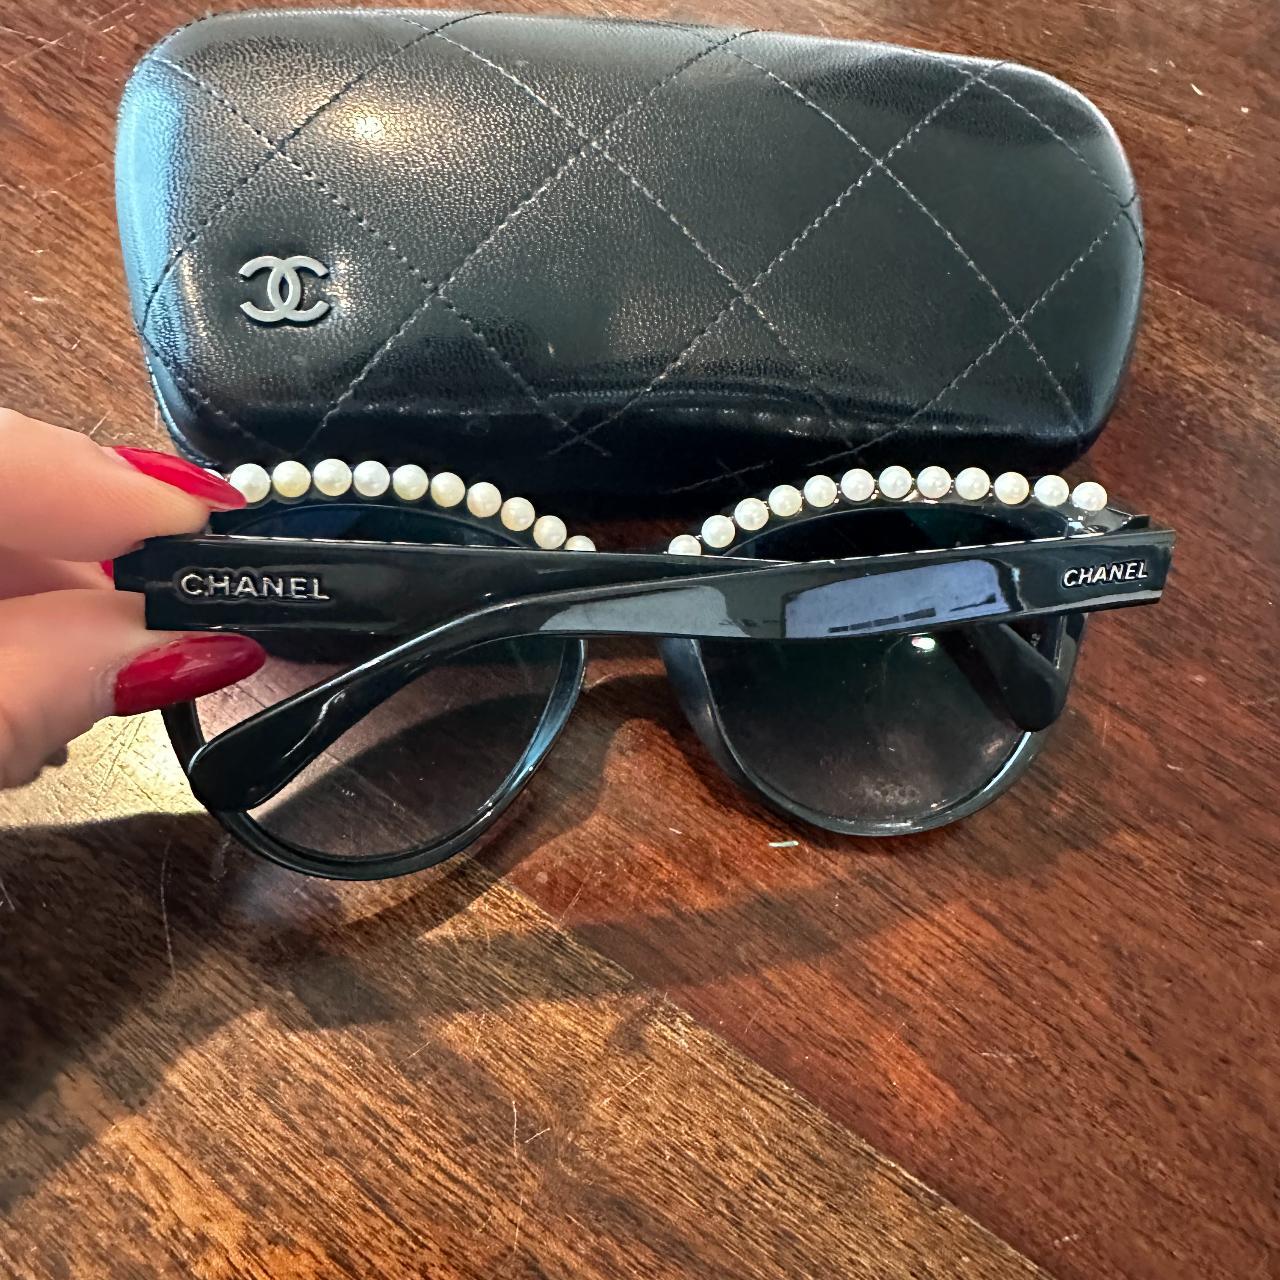 Chanel Sunglasses with pearls on top, comes with the